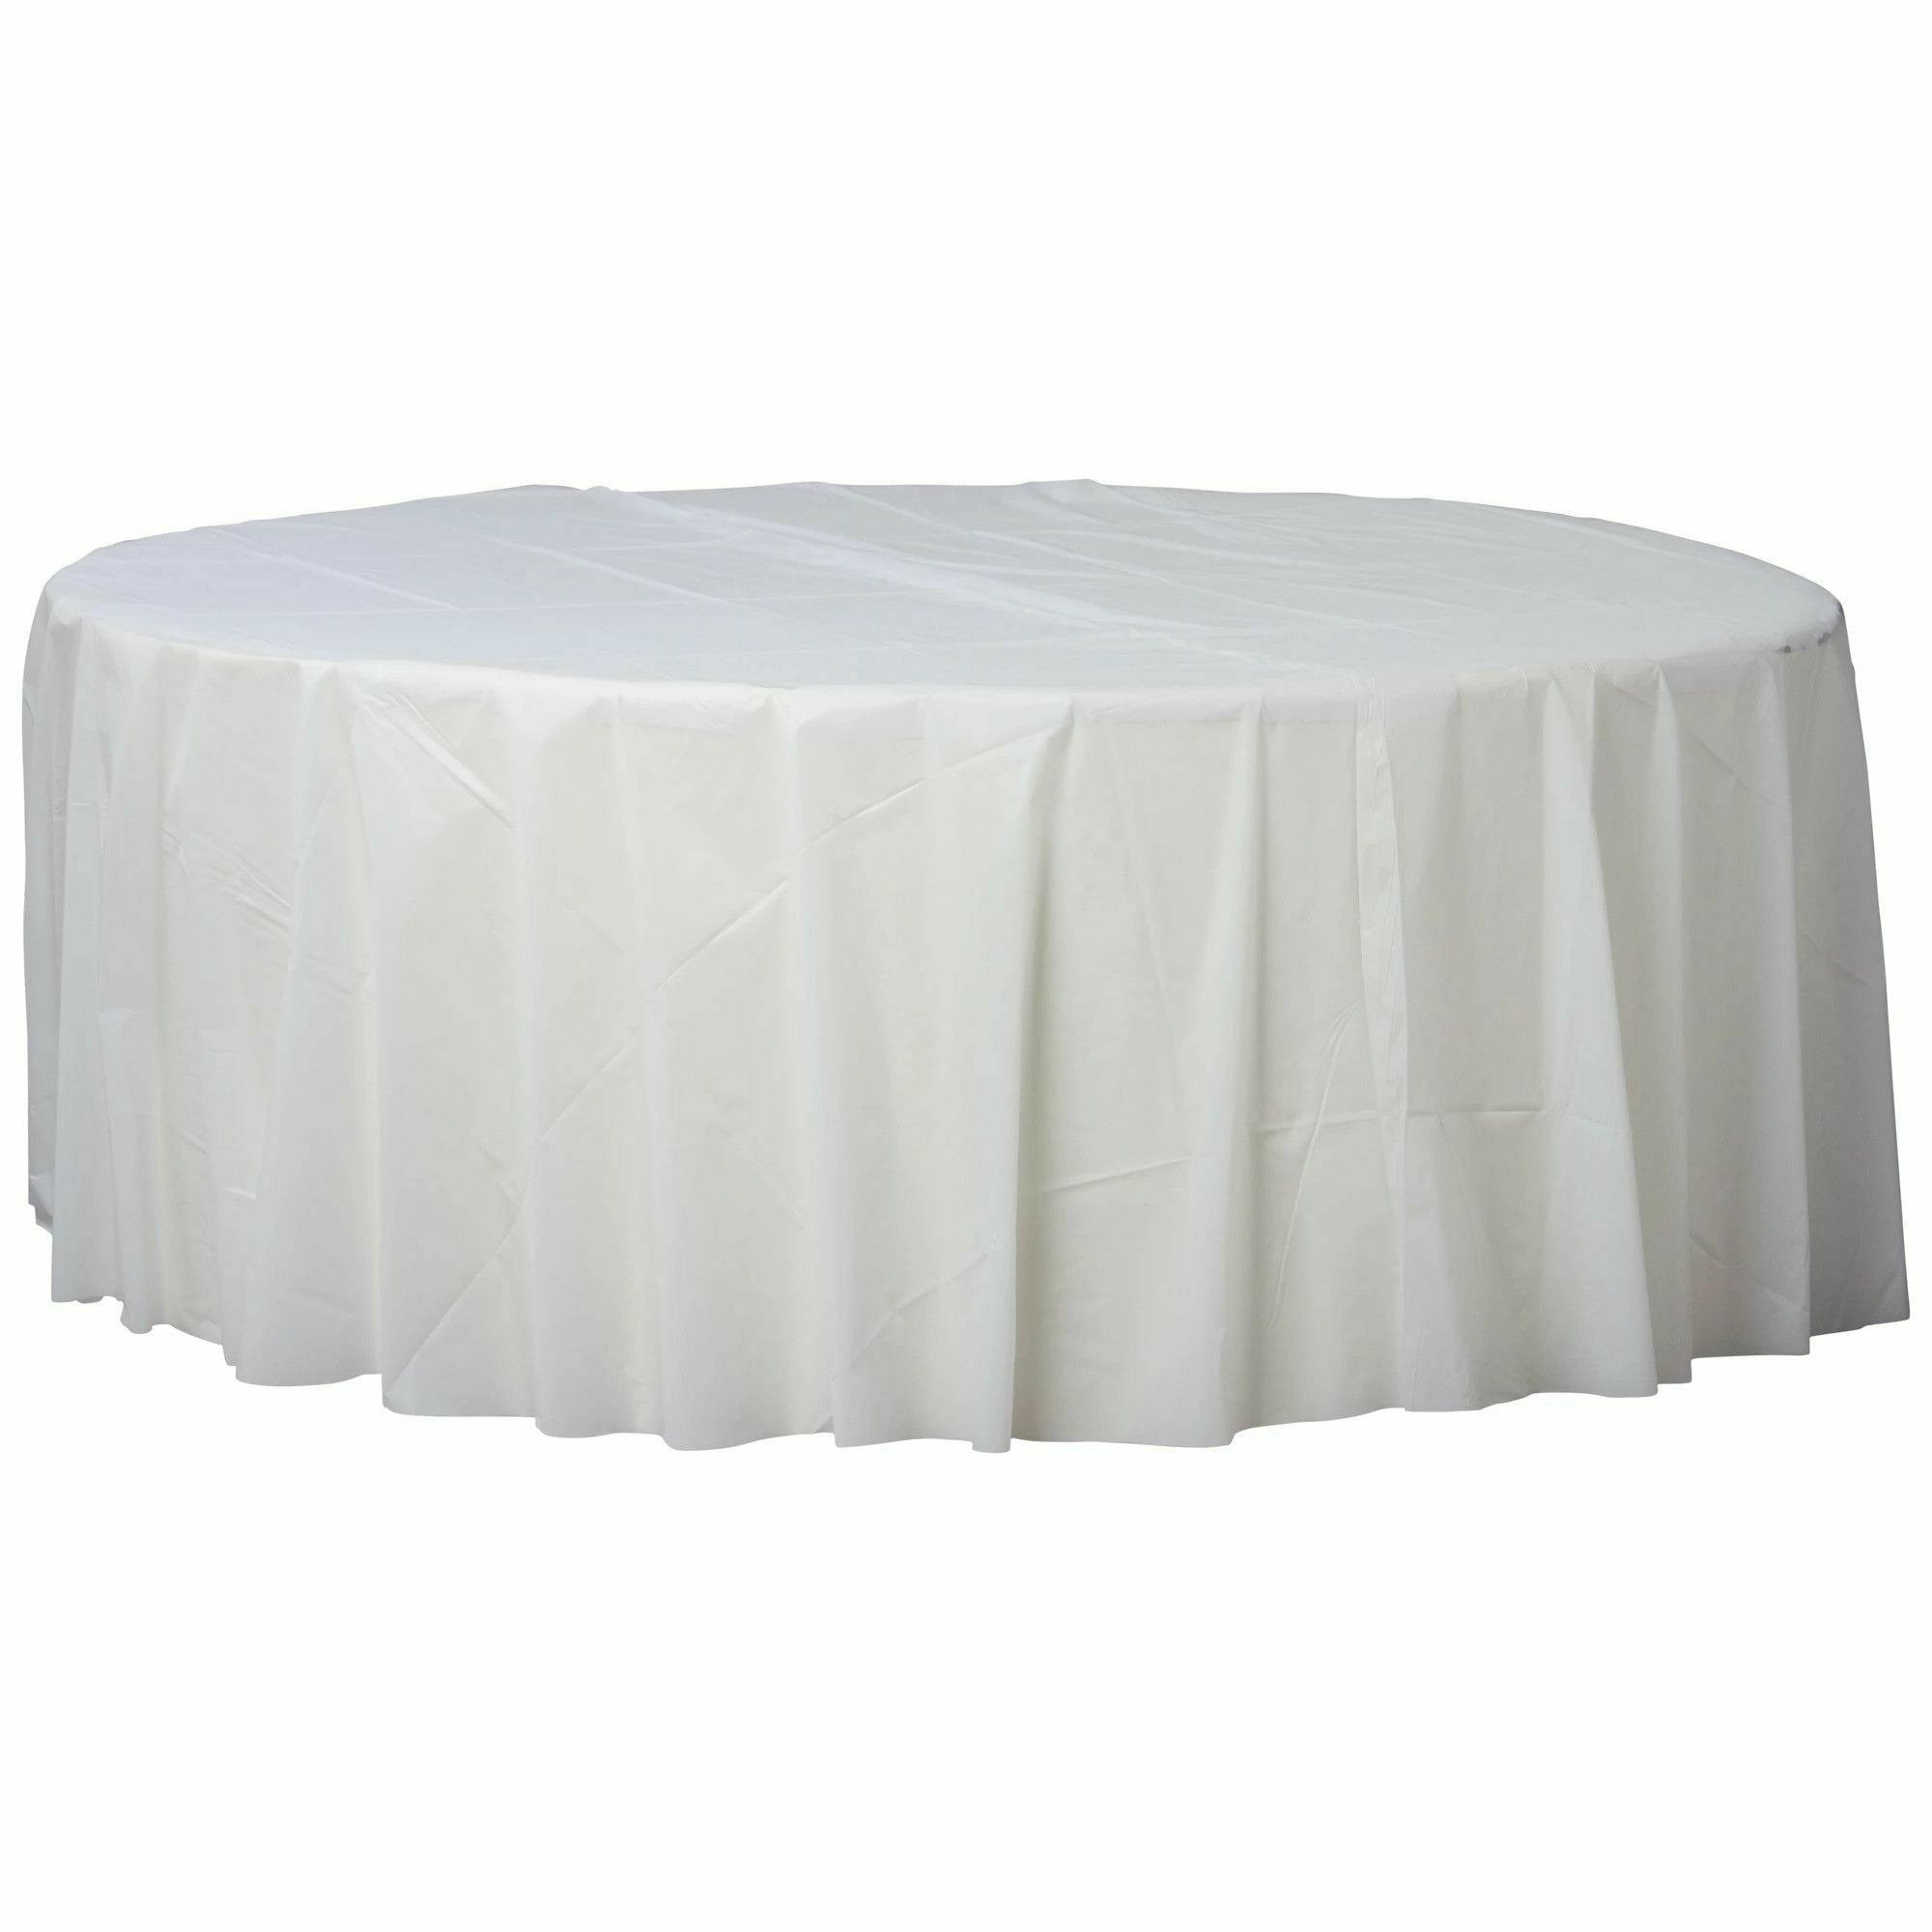 Amscan BASIC Frosty White - 84" Round Plastic Table Cover